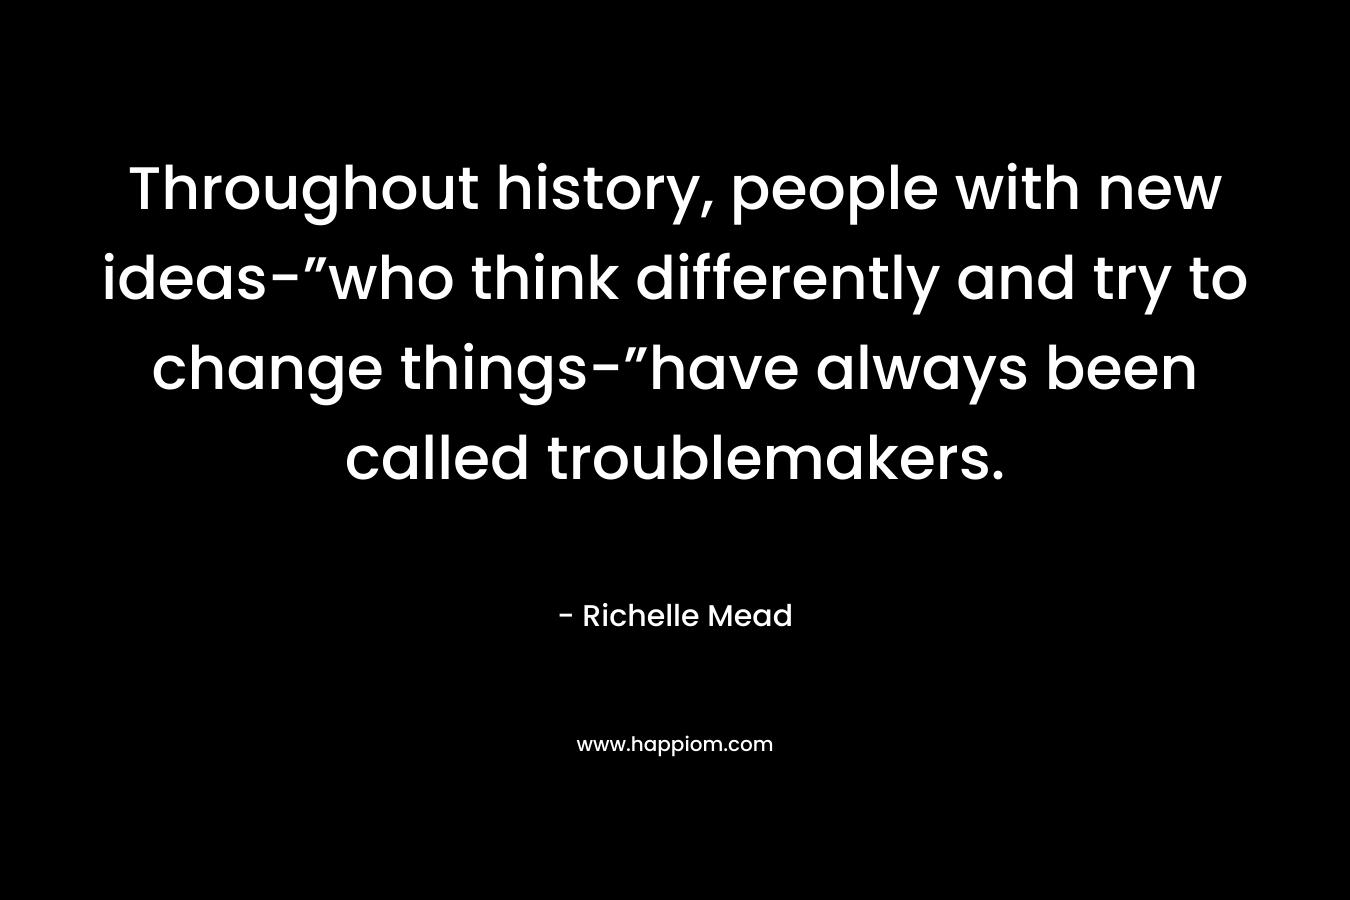 Throughout history, people with new ideas-”who think differently and try to change things-”have always been called troublemakers.